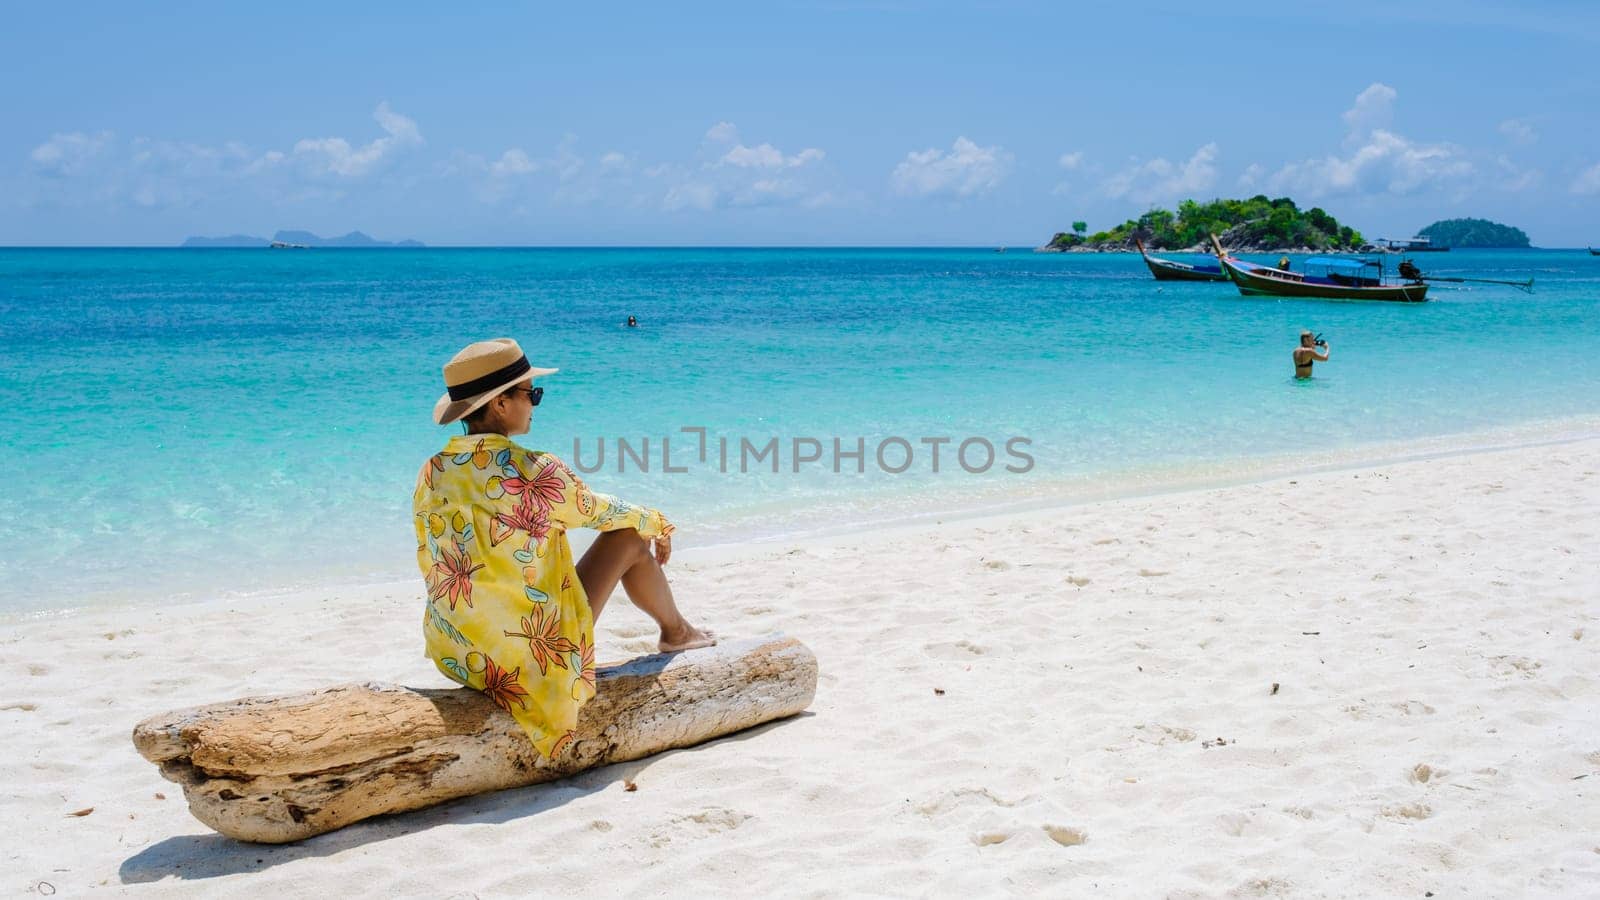 Koh Lipe Island Southern Thailand with turqouse colored ocean and white sandy beach at Ko Lipe by fokkebok